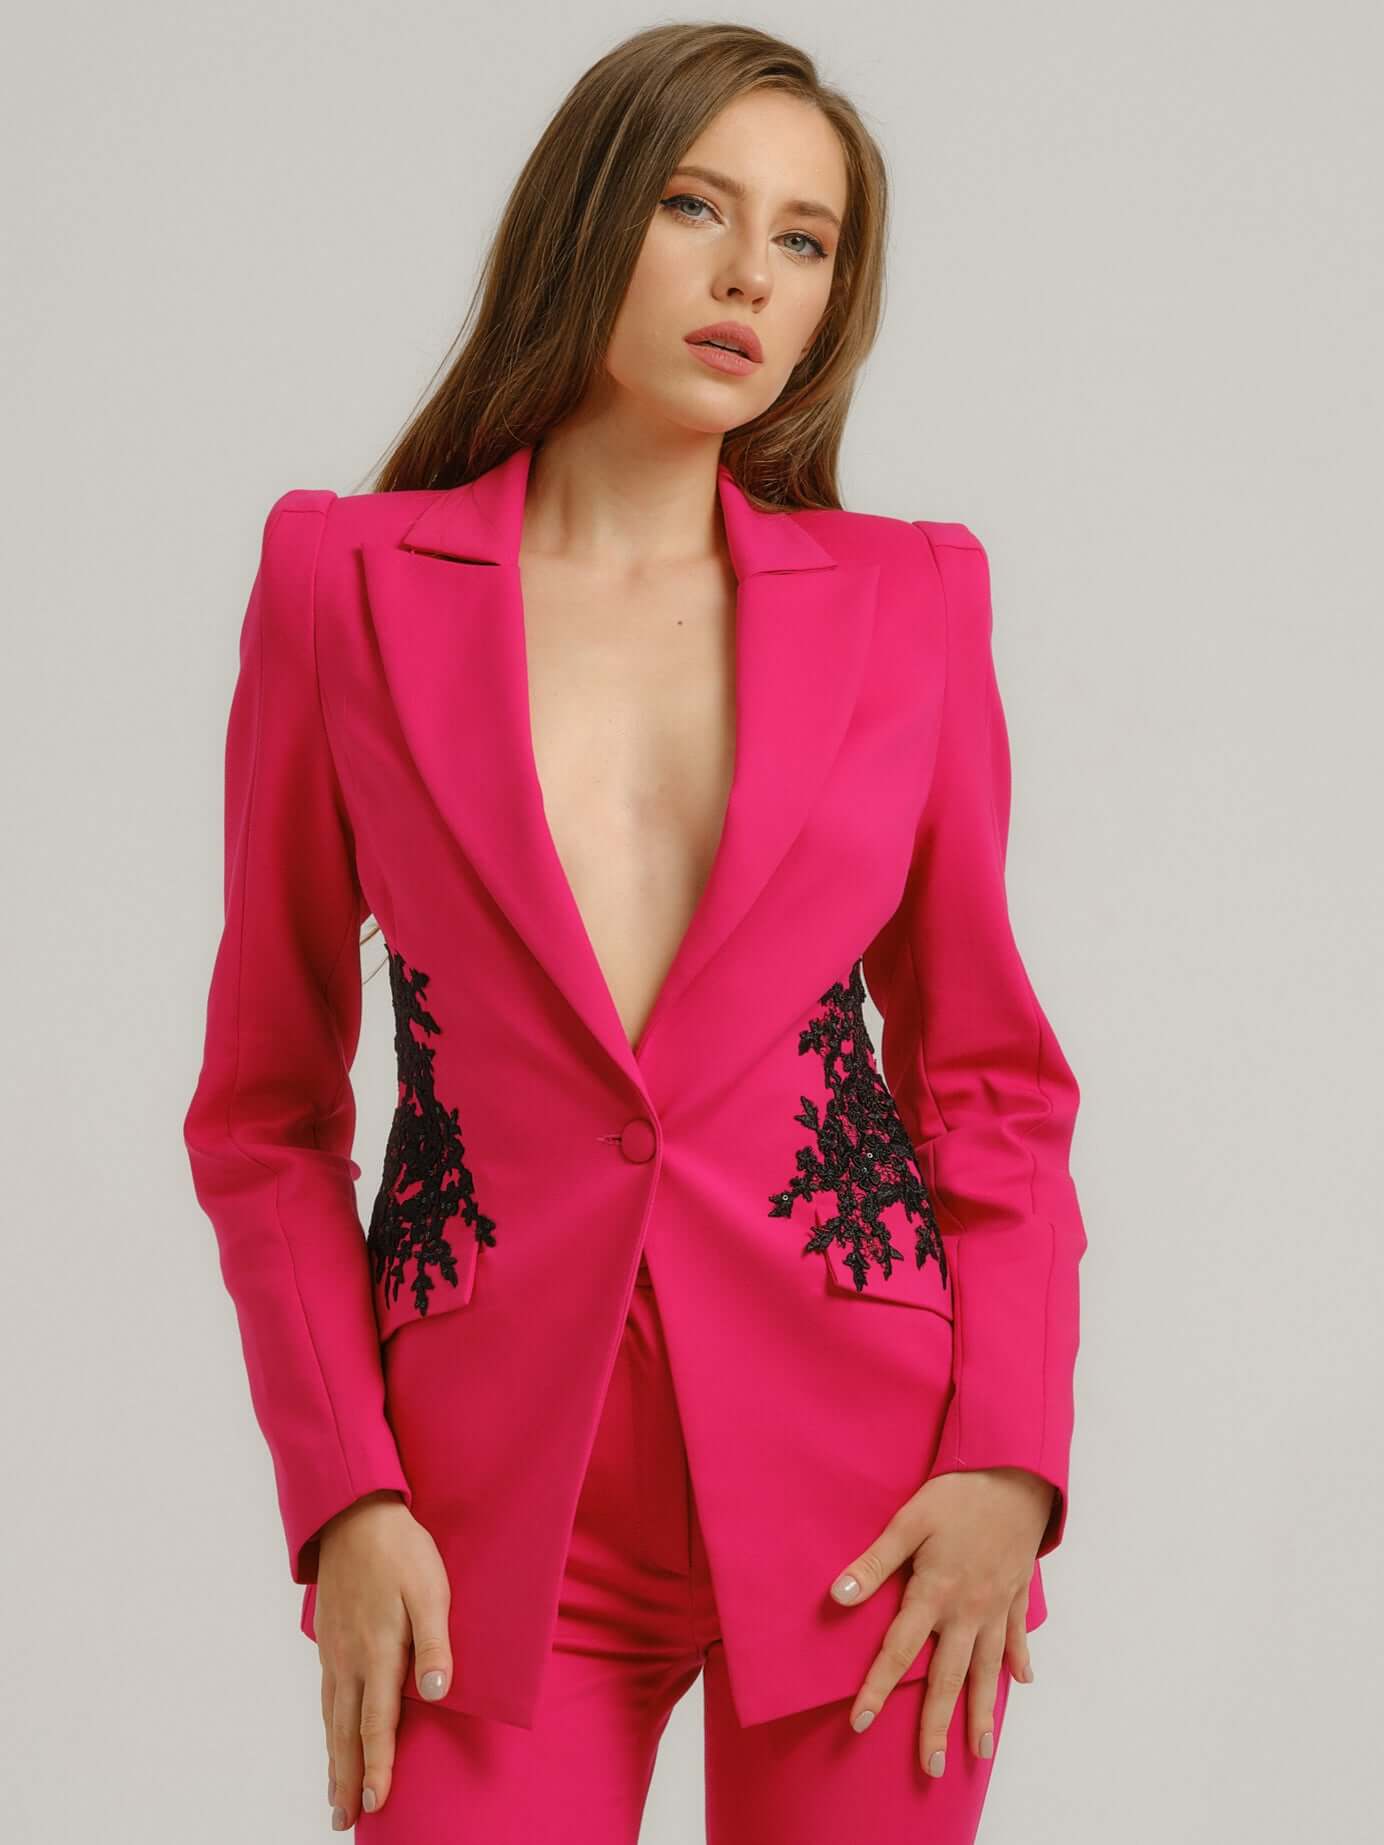 Fantasy Tailored Suit with Embroidery - Pink by Tia Dorraine Women's Luxury Fashion Designer Clothing Brand